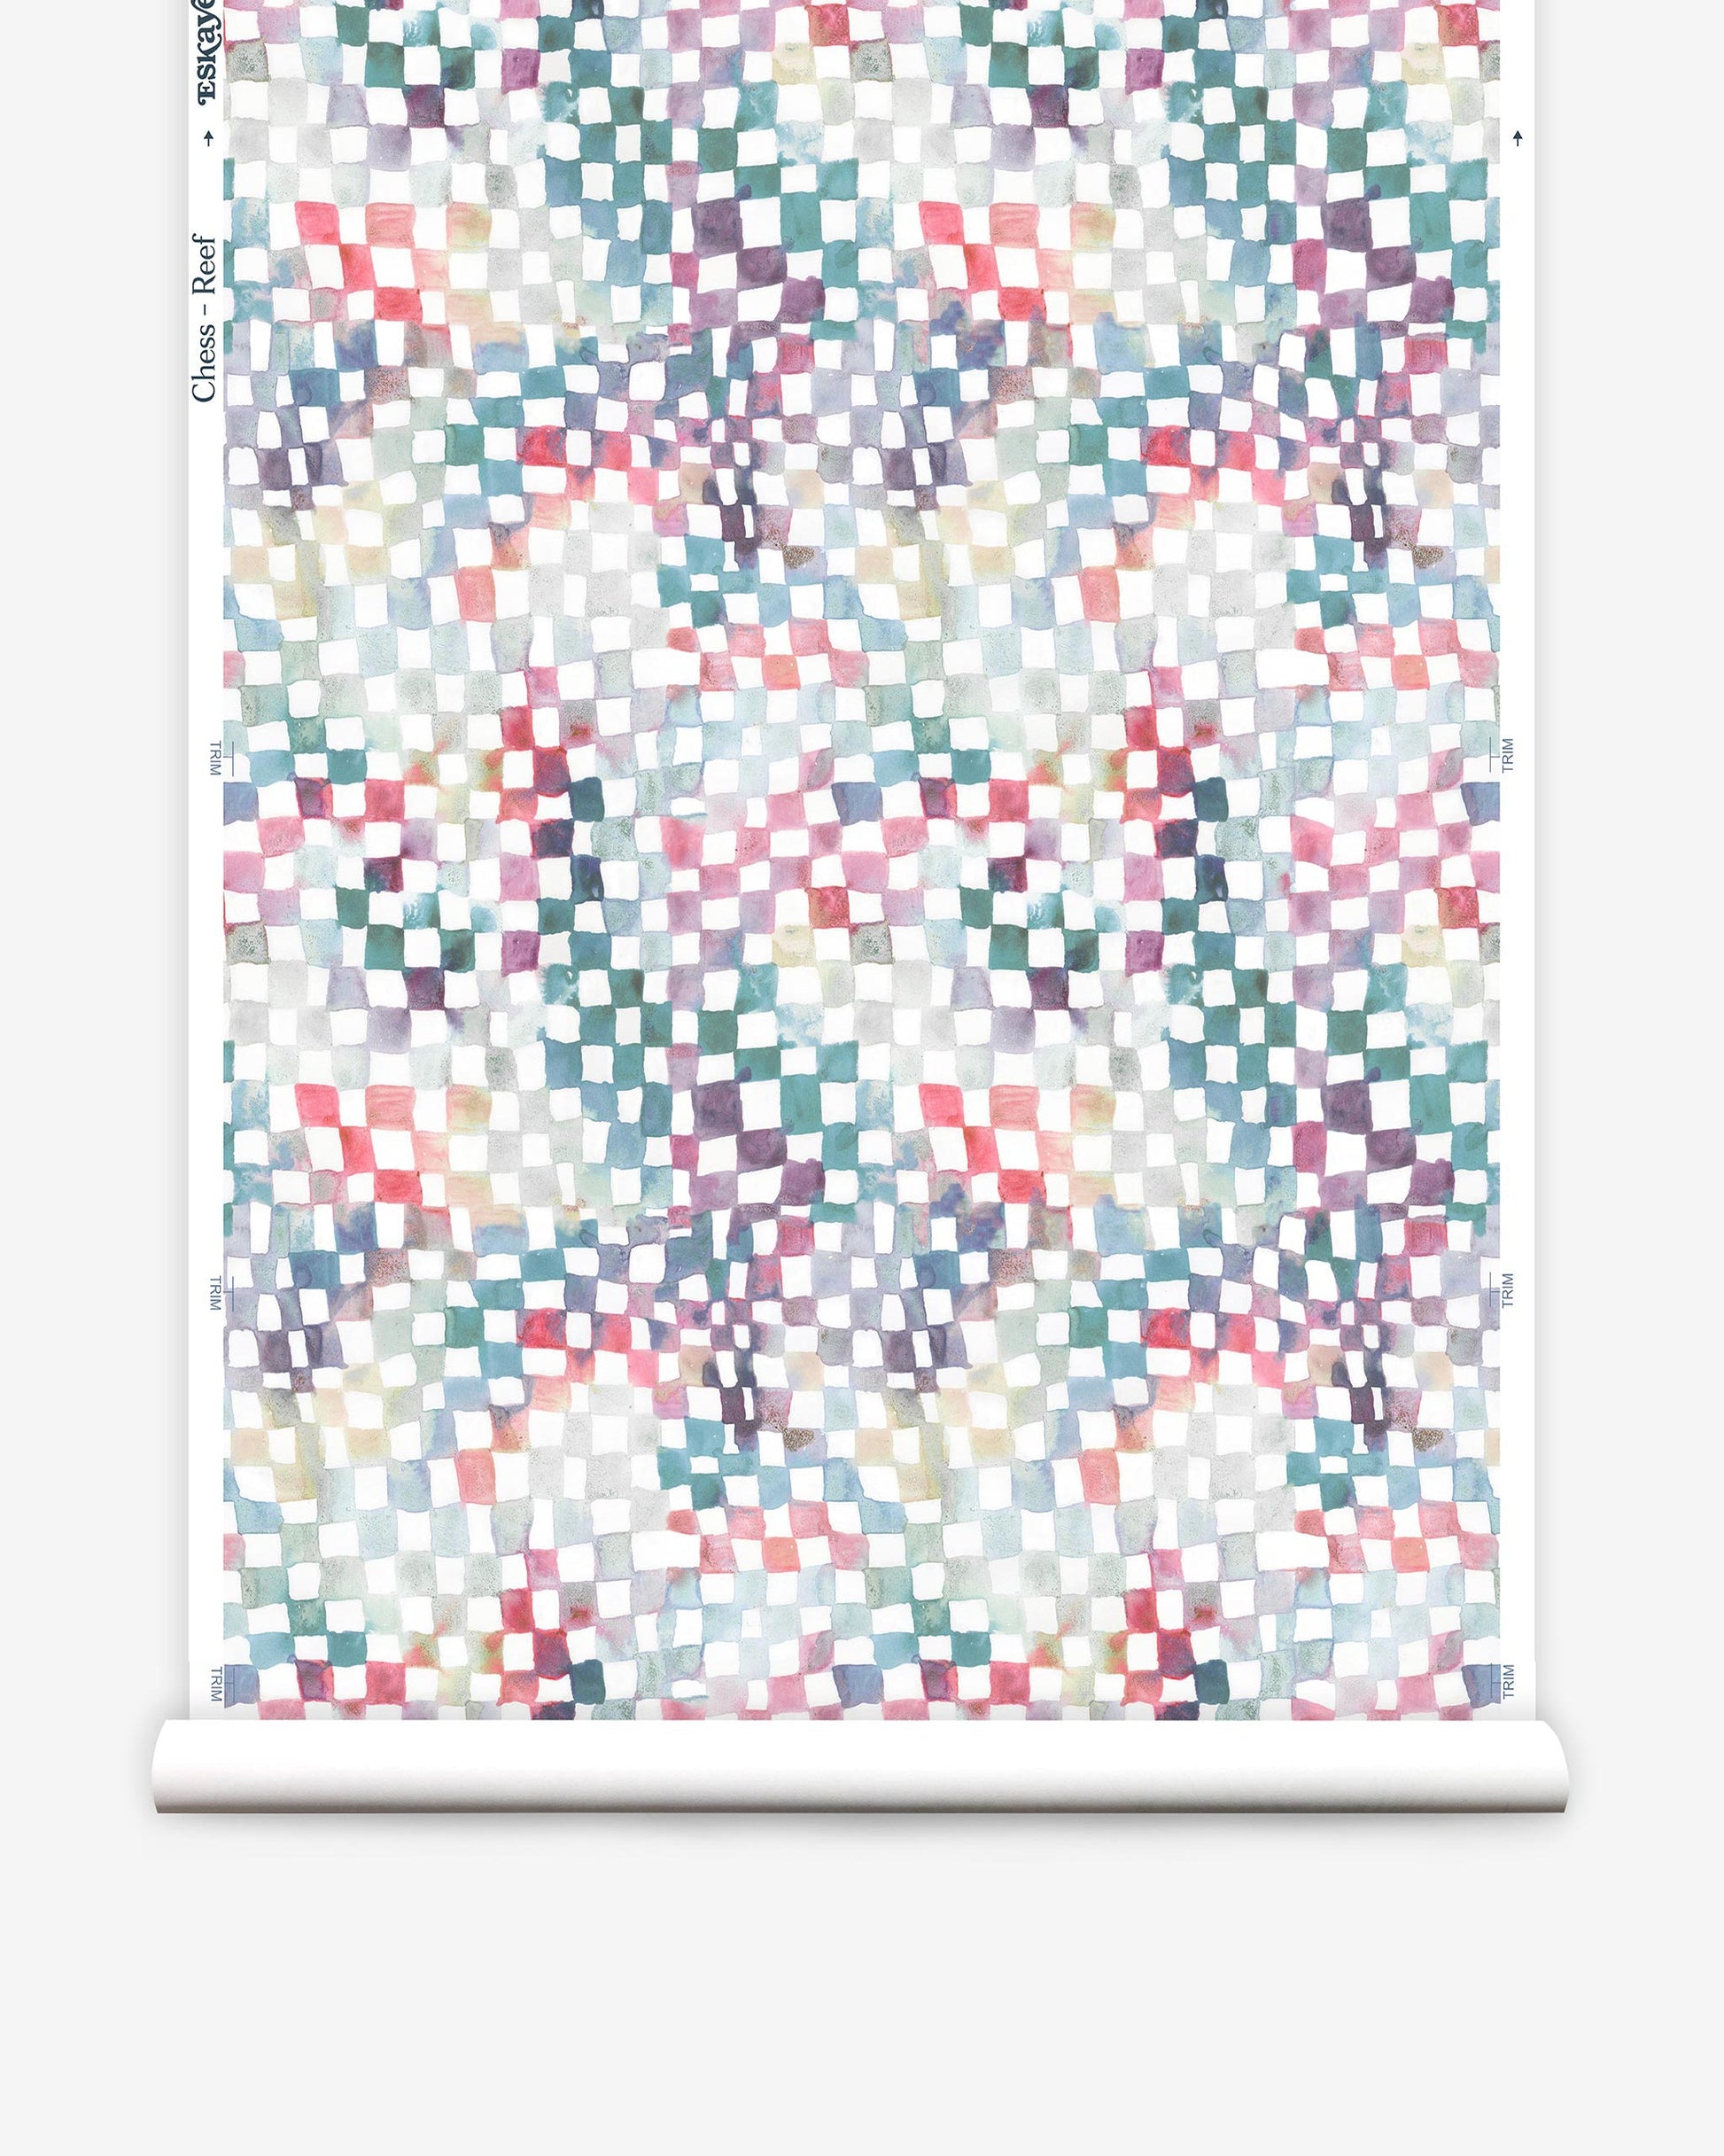 A roll of Chess Wallpaper||Reef with a checkerboard pattern on it.